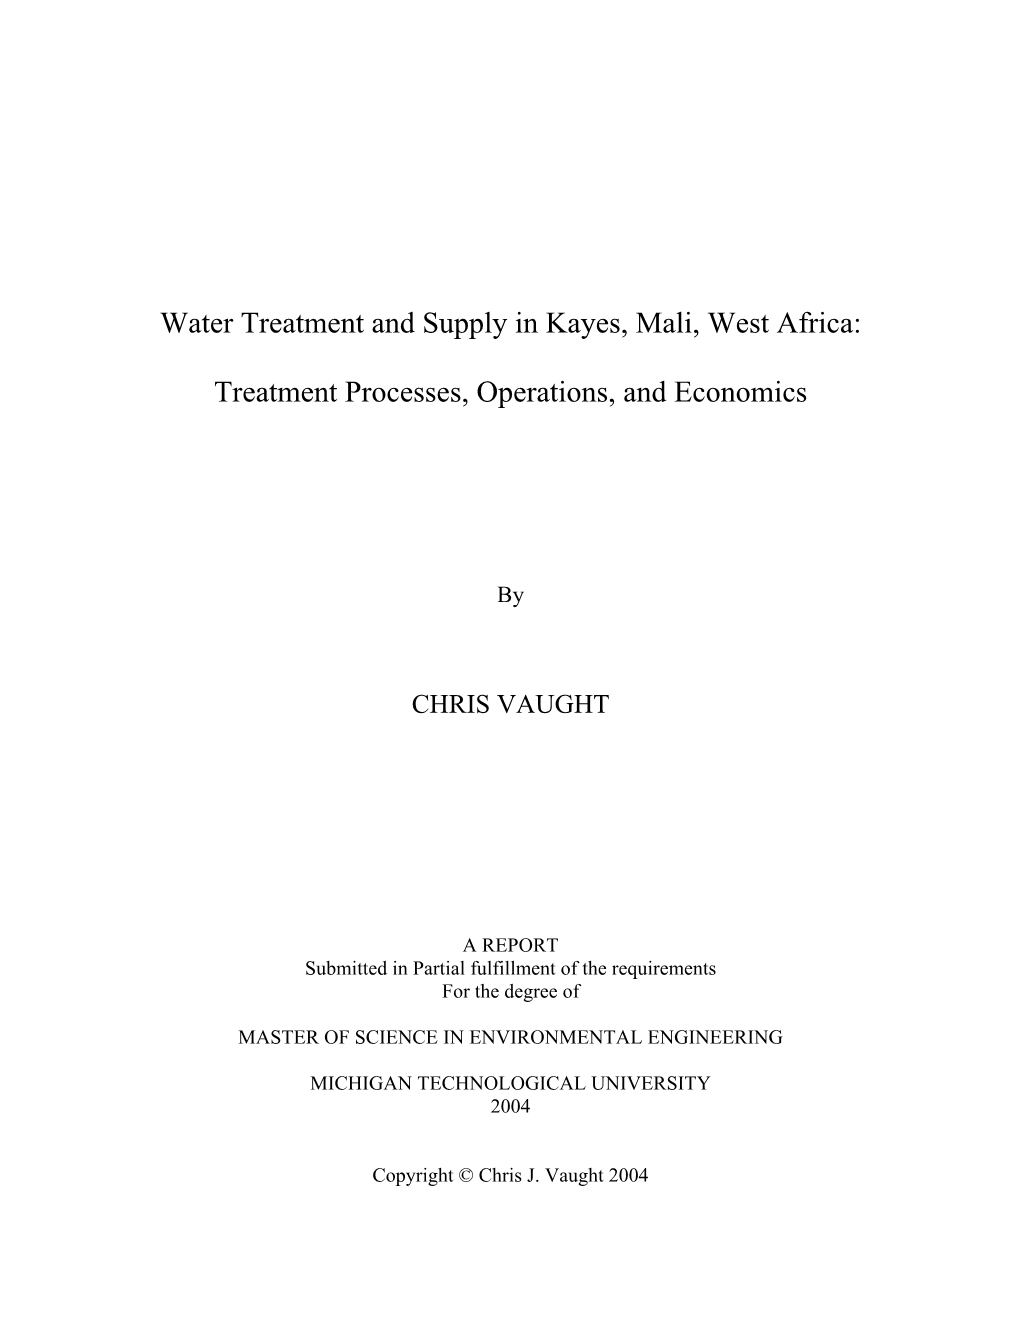 Water Treatment and Supply in Kayes, Mali, West Africa